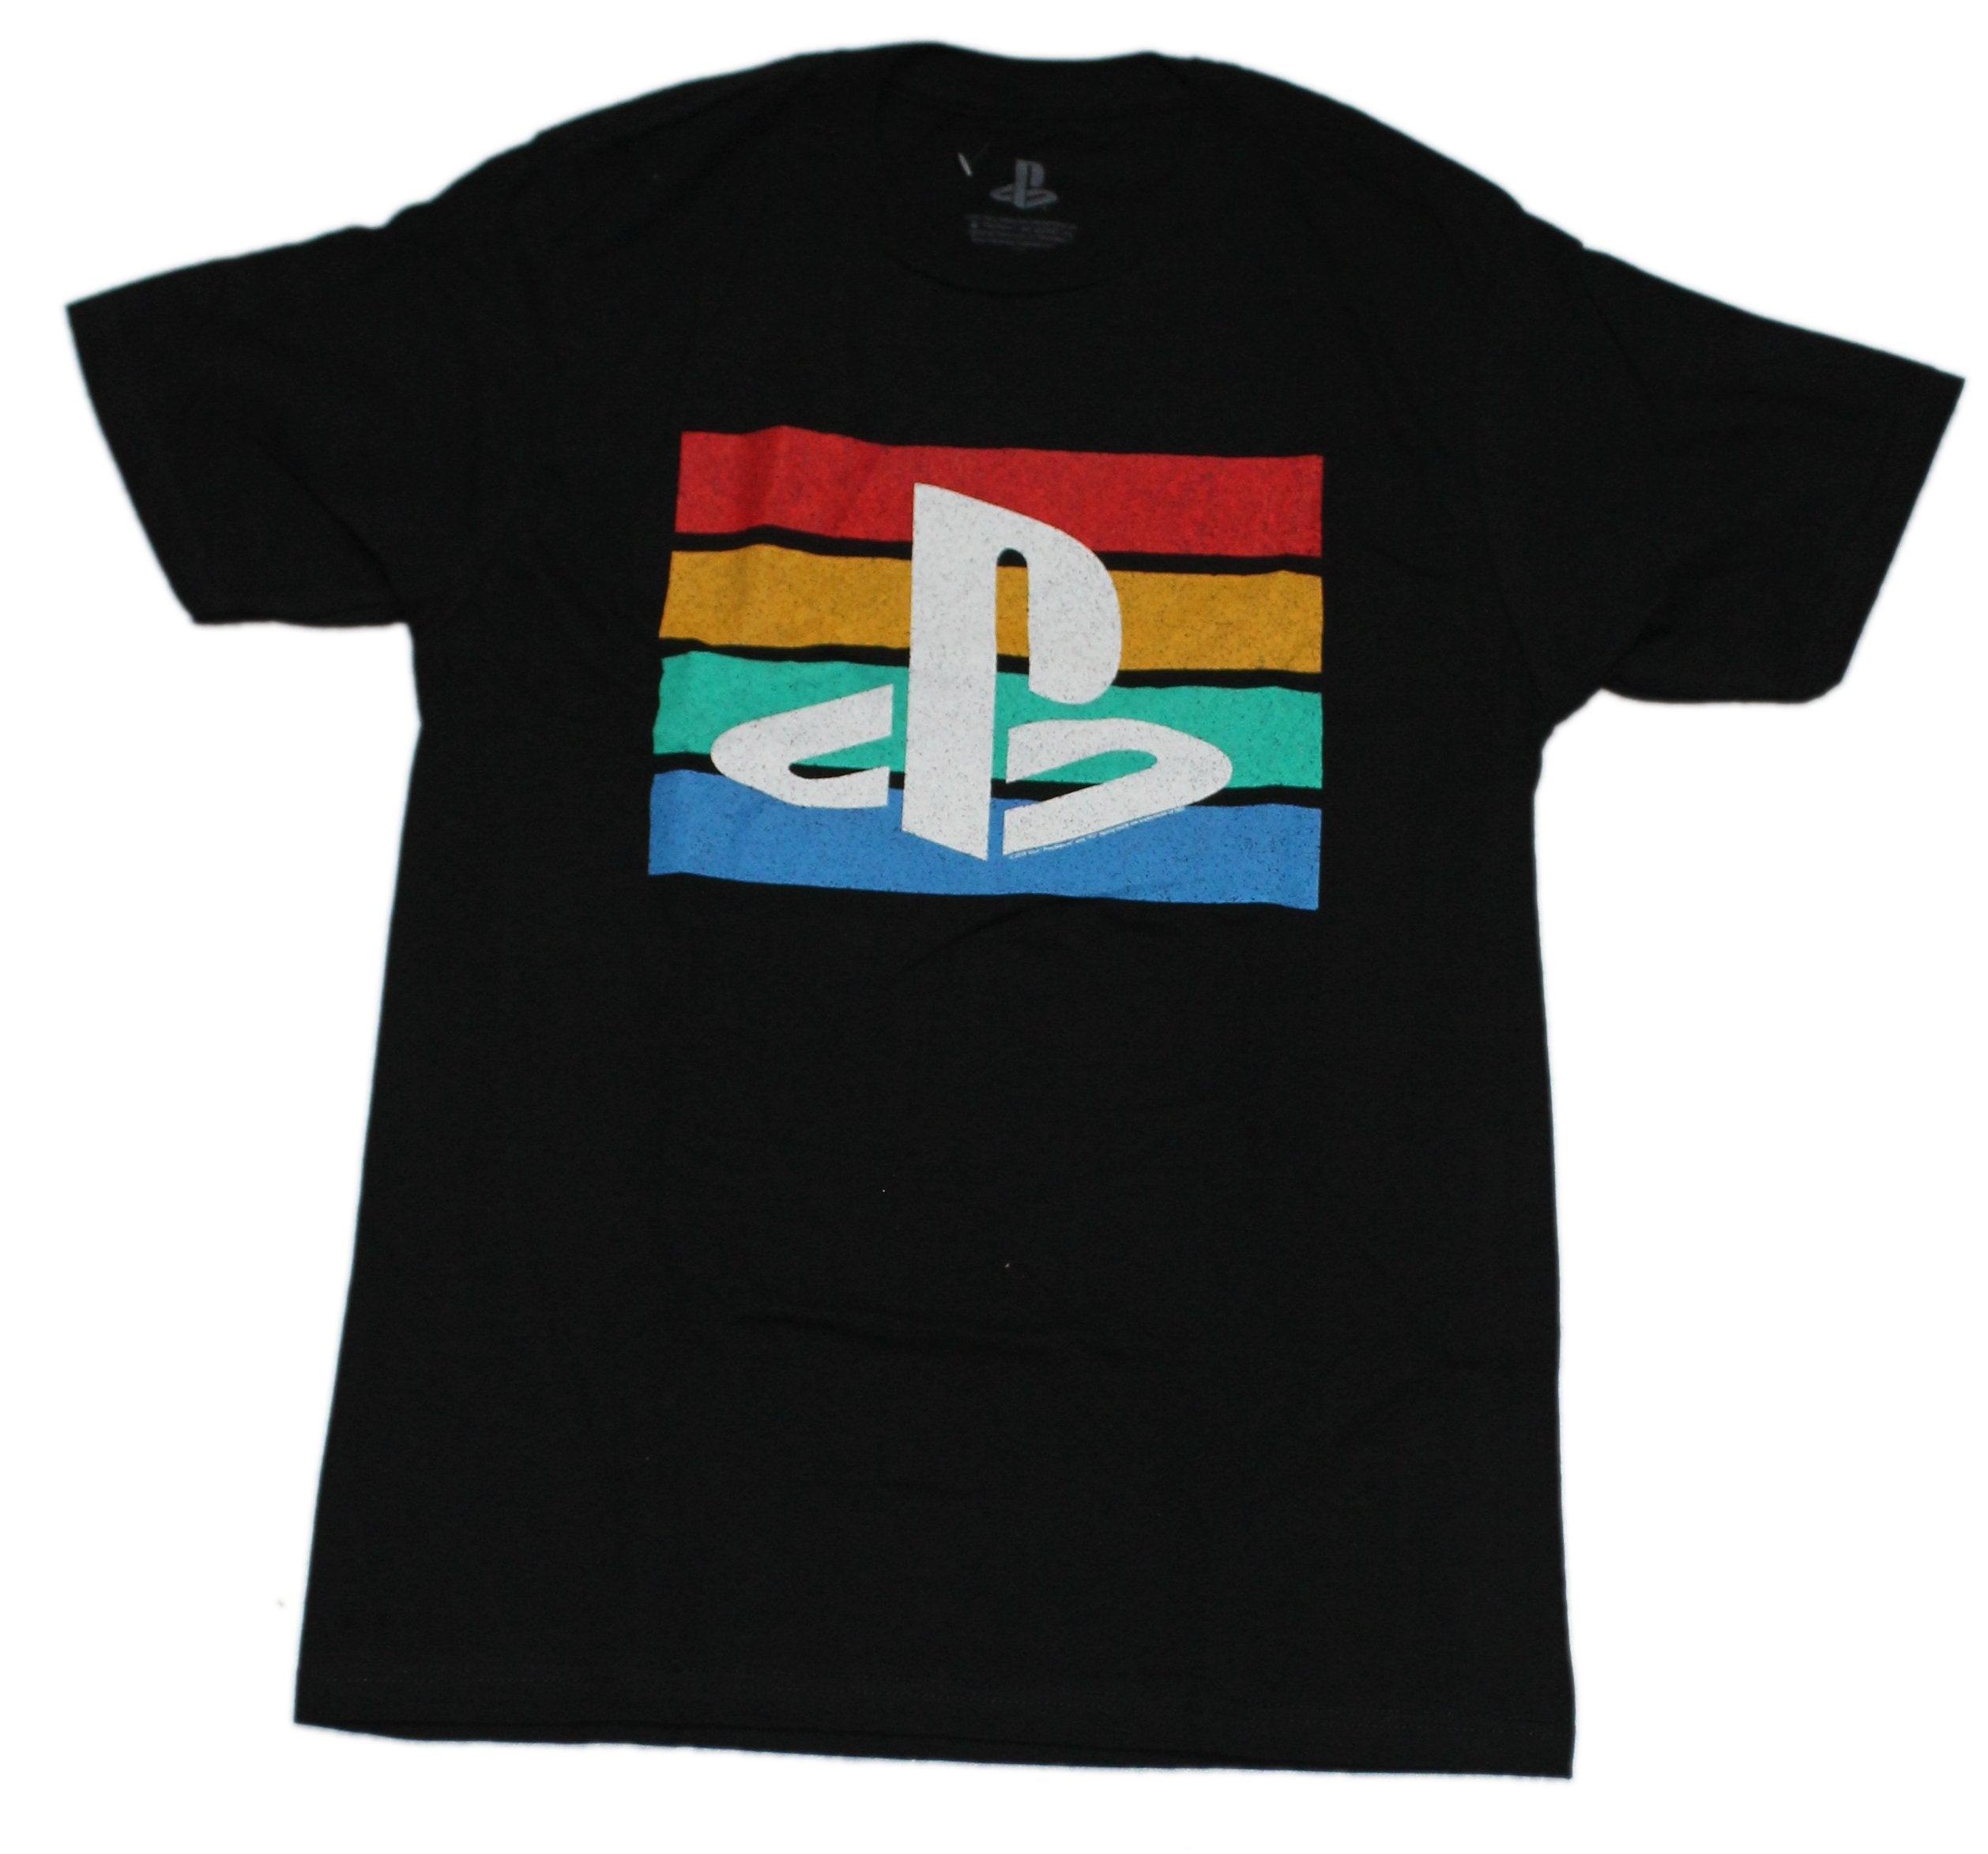 Playstation Mens T-Shirt - Distressed Logo Over Primary Colors